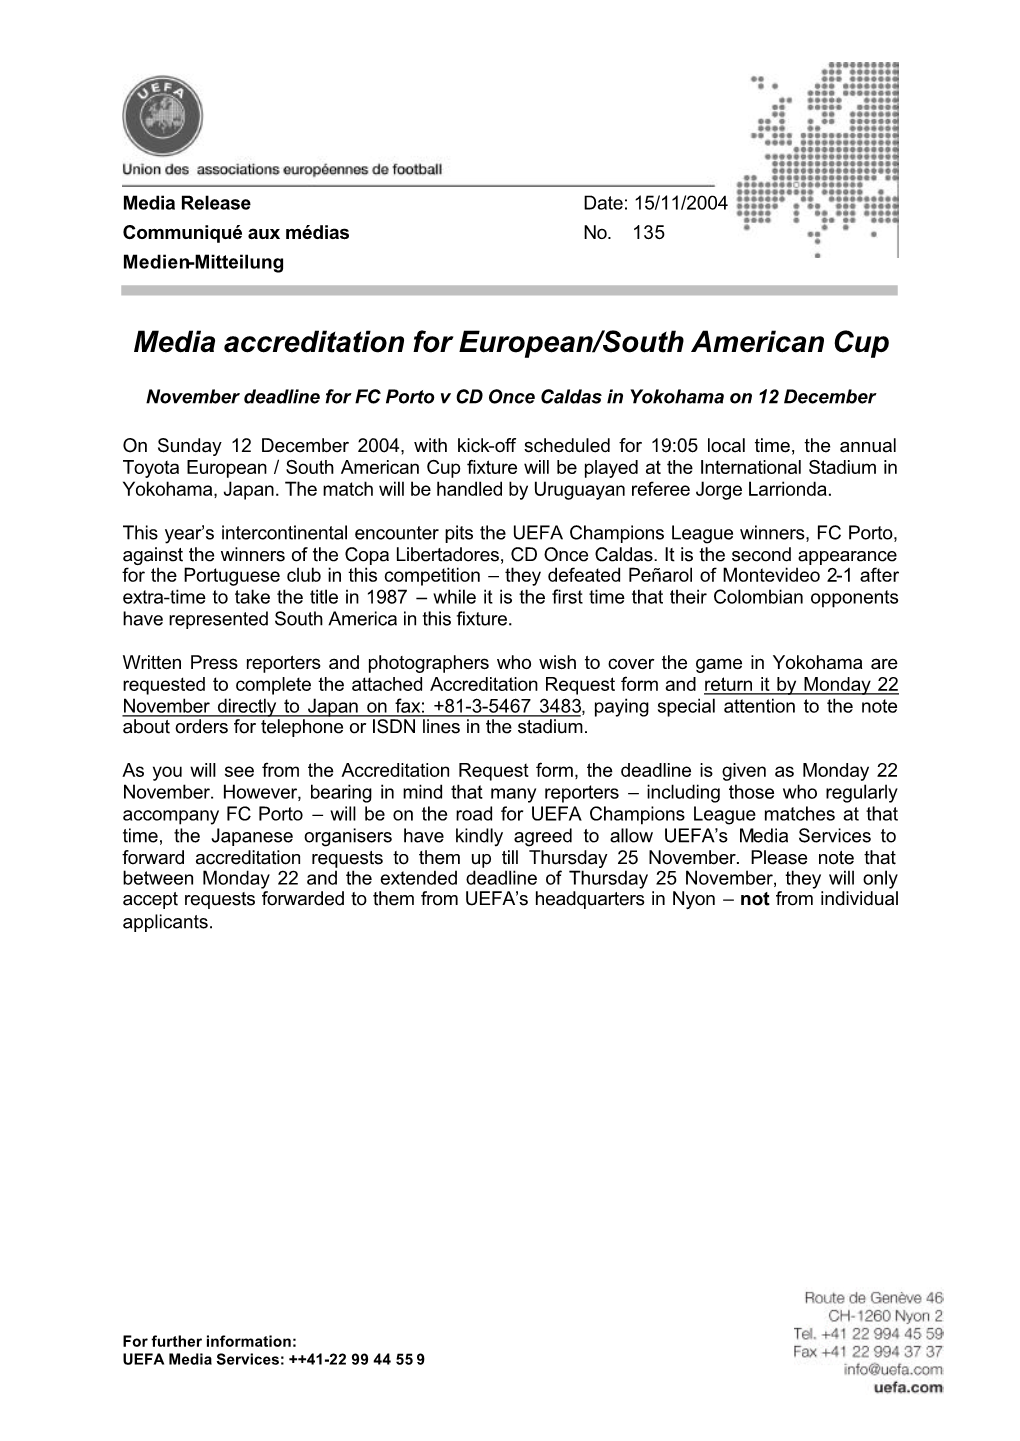 Media Accreditation for European/South American Cup